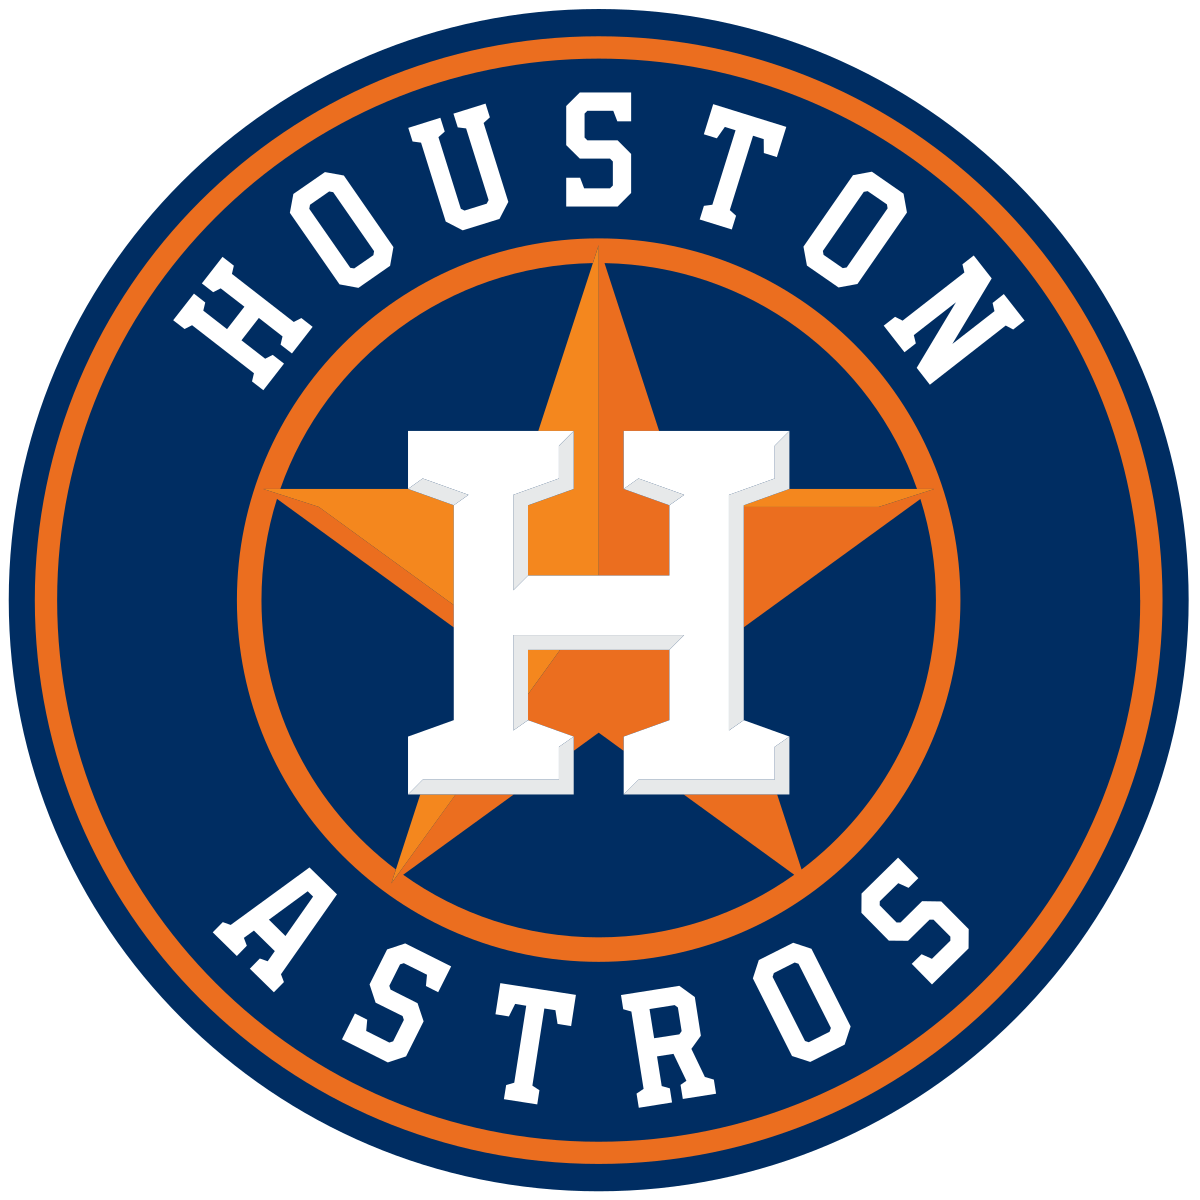 astros jersey font